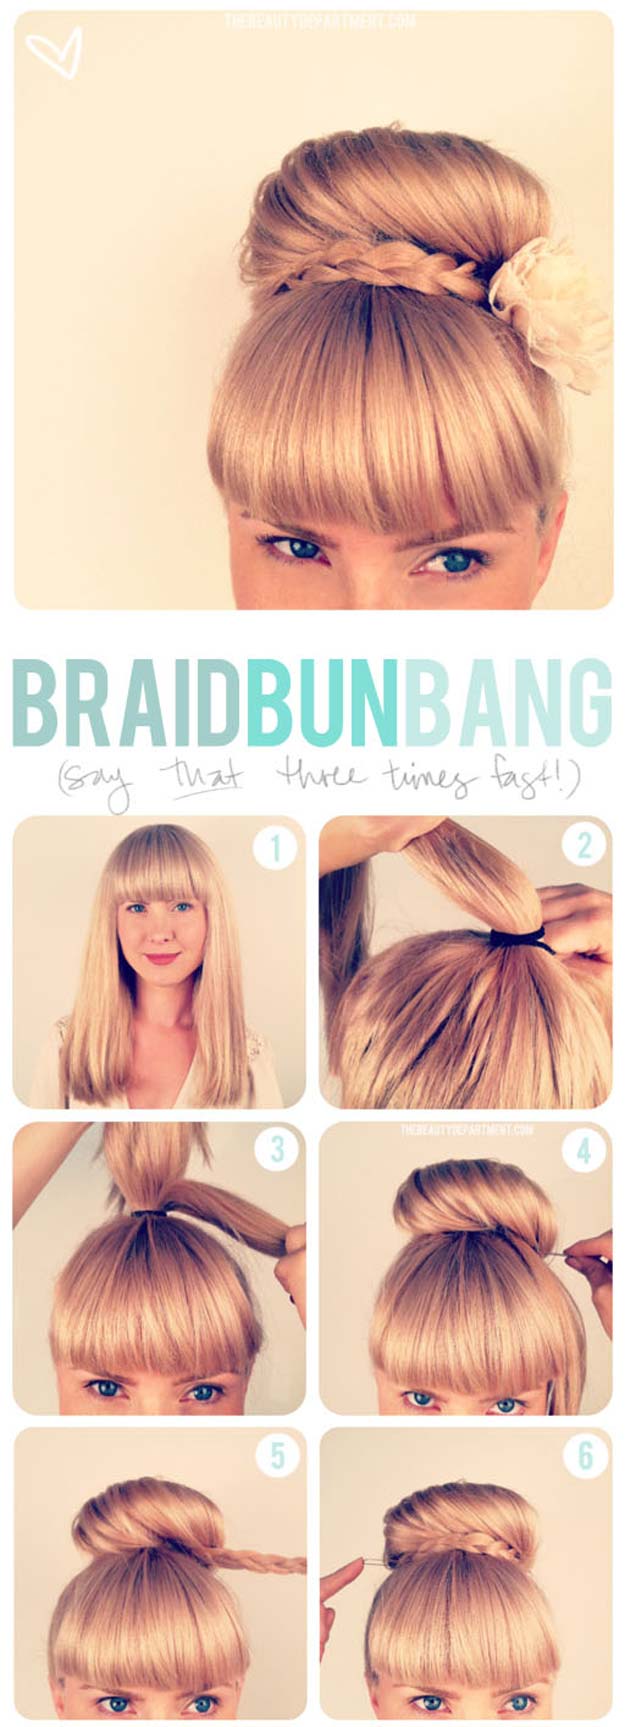 Creative DIY Hair Tutorials - Updo + Bangs - Color, Rainbow, Galaxy and Unique Styles for Long, Short and Medium Hair - Braids, Dyes, Instructions for Teens and Women #hairstyles #hairideas #beauty #teens #easyhairstyles